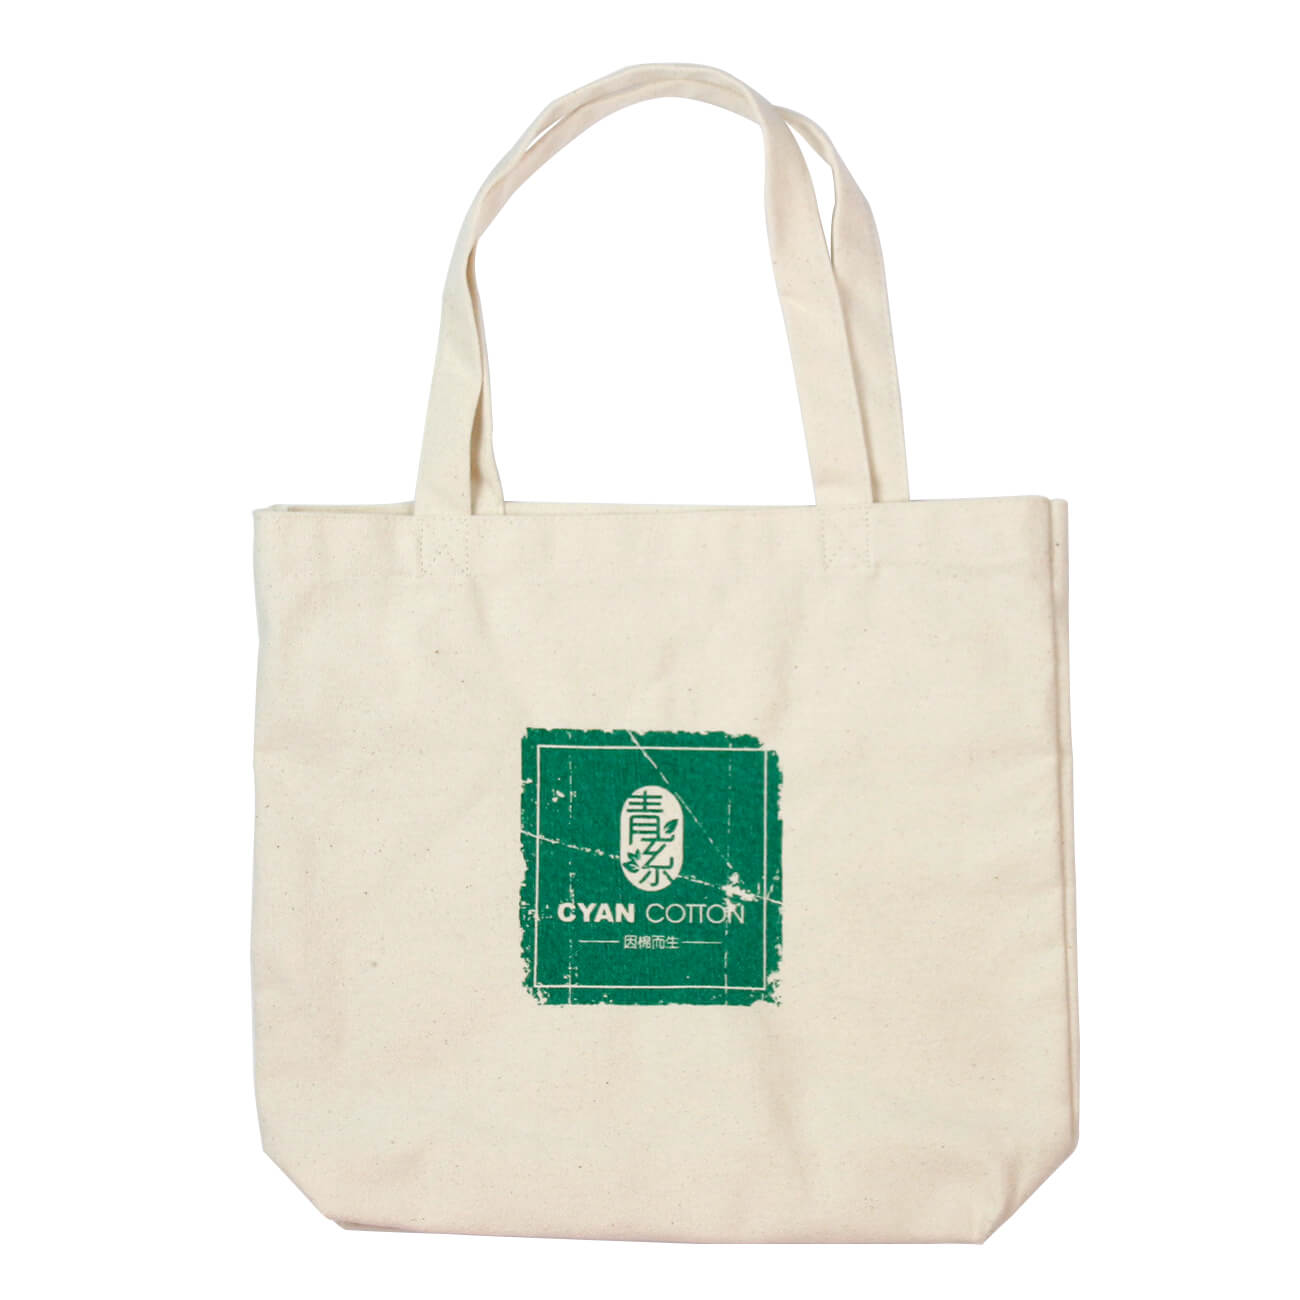 Natural Cotton Tote Bags 100 Cotton Shopping Bags 